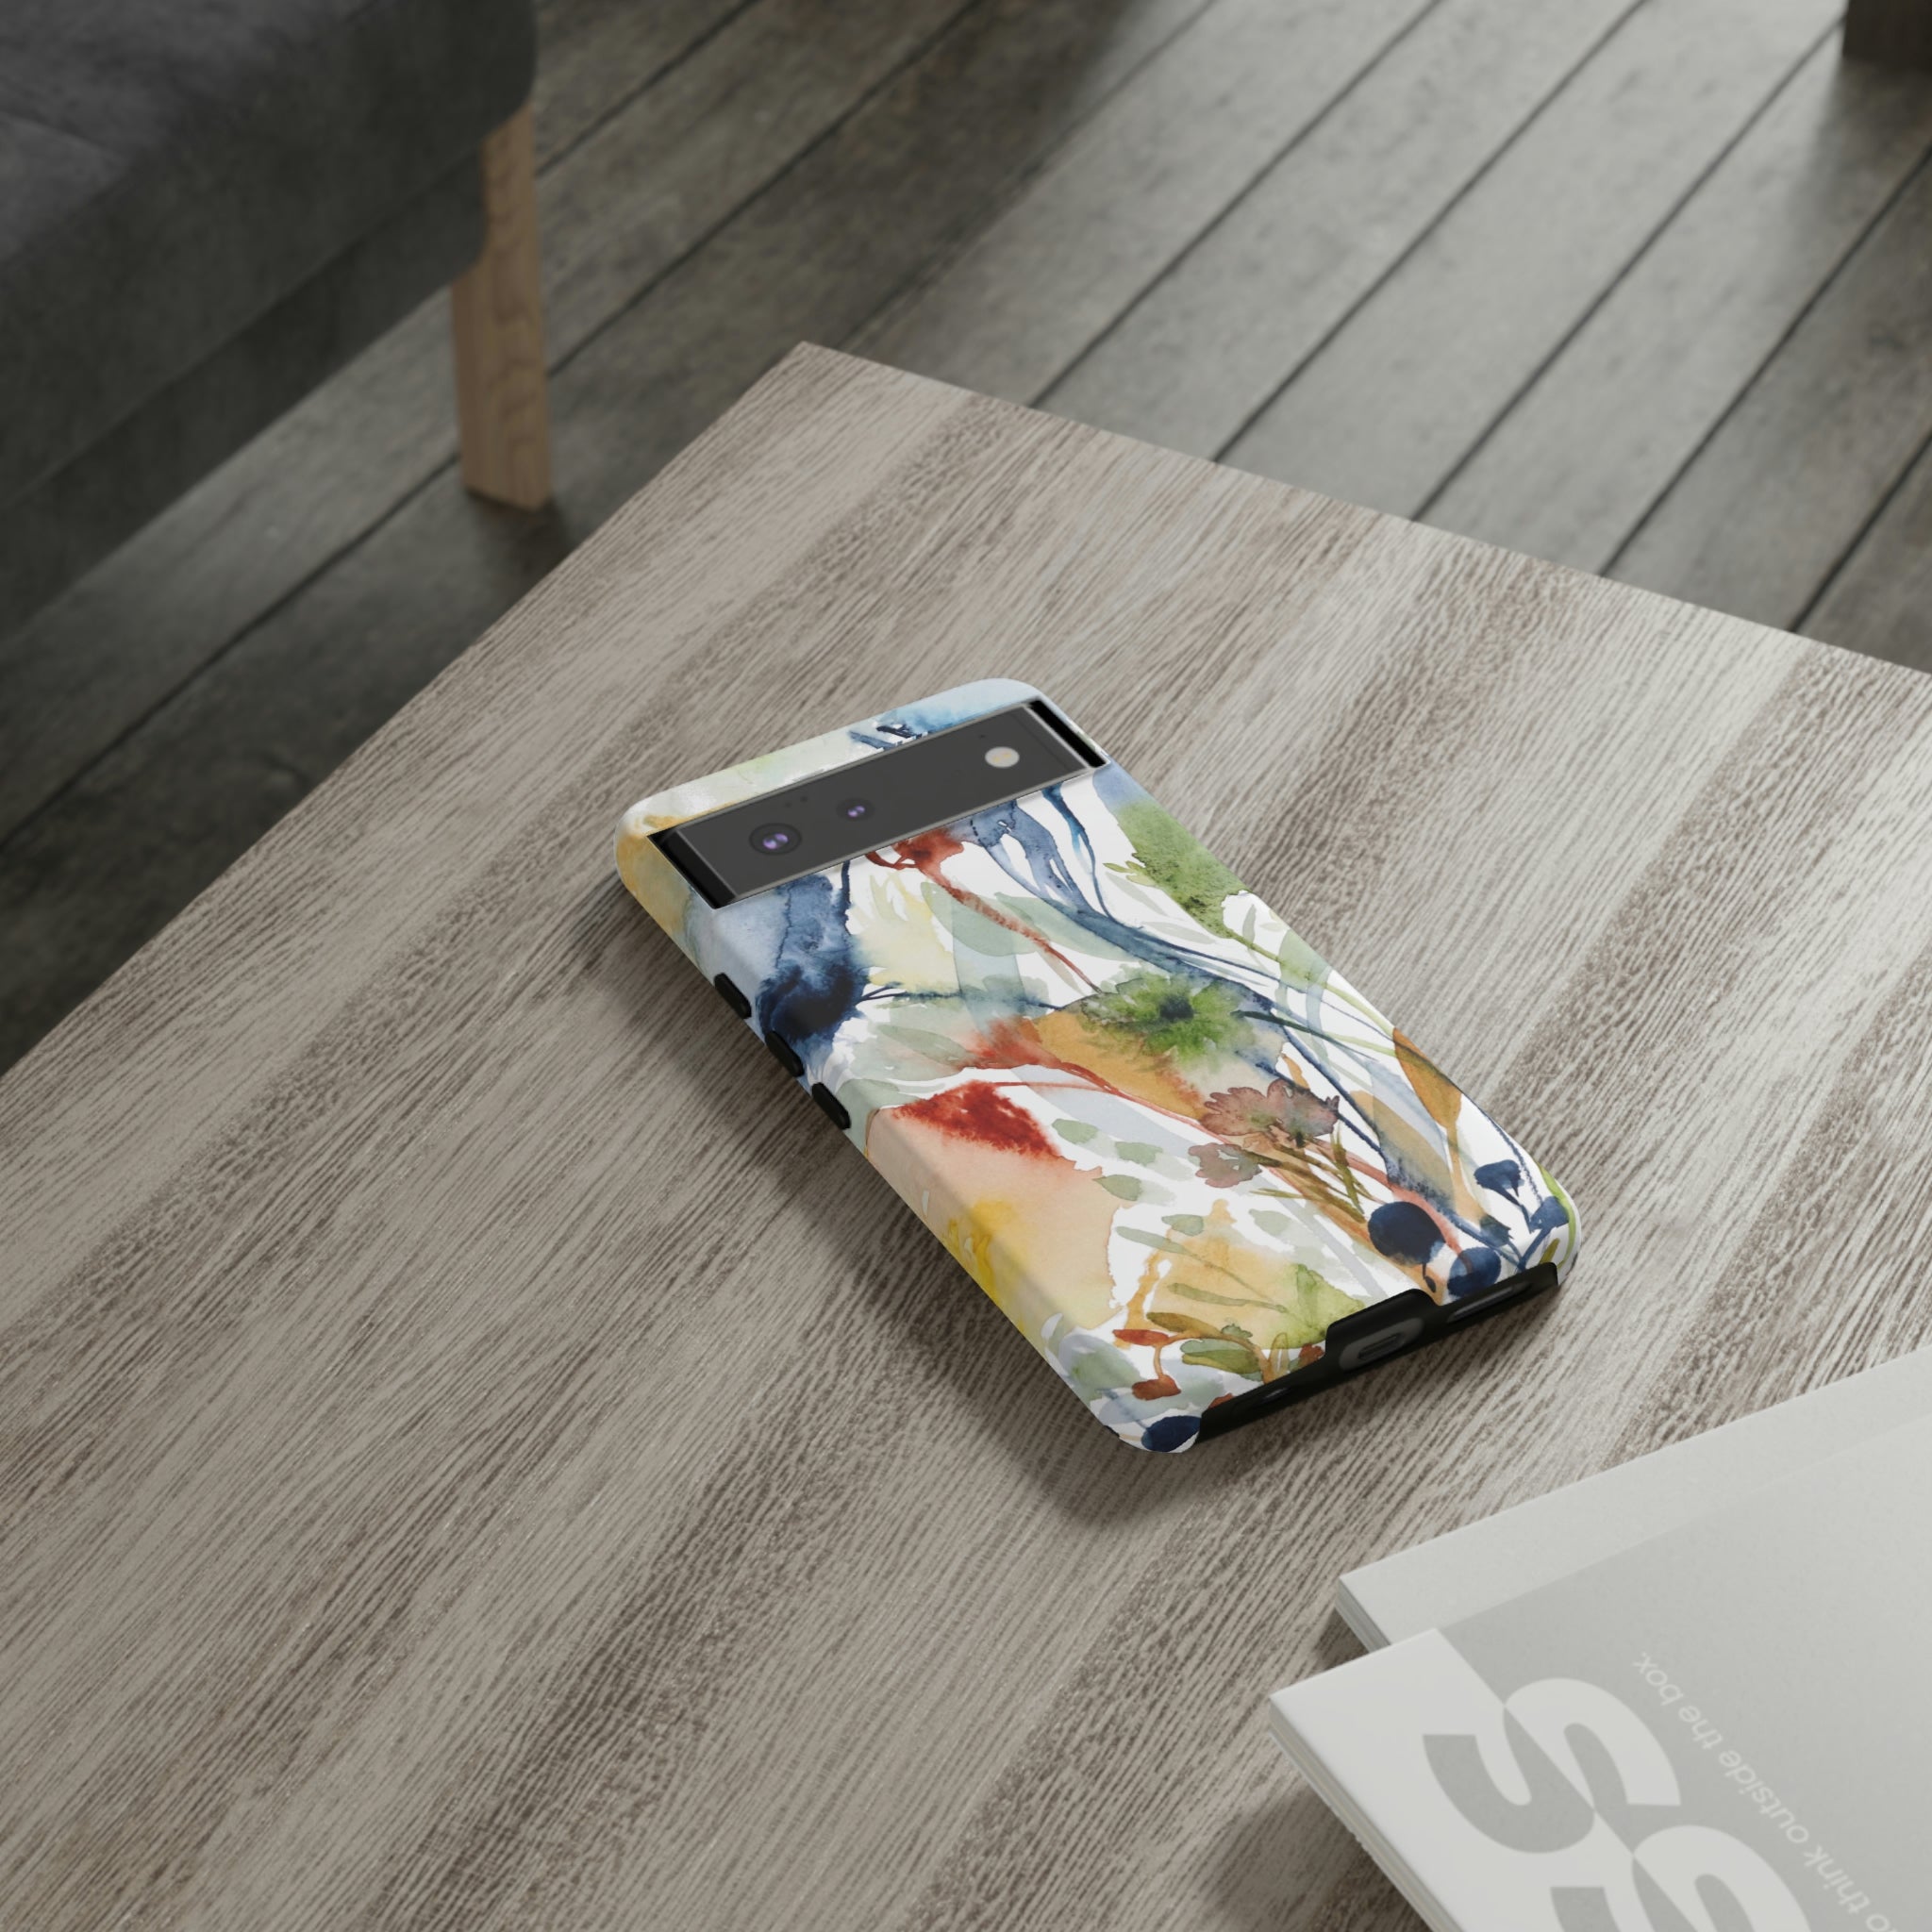 Flowers on Cell Phone Cases | Tough Cases